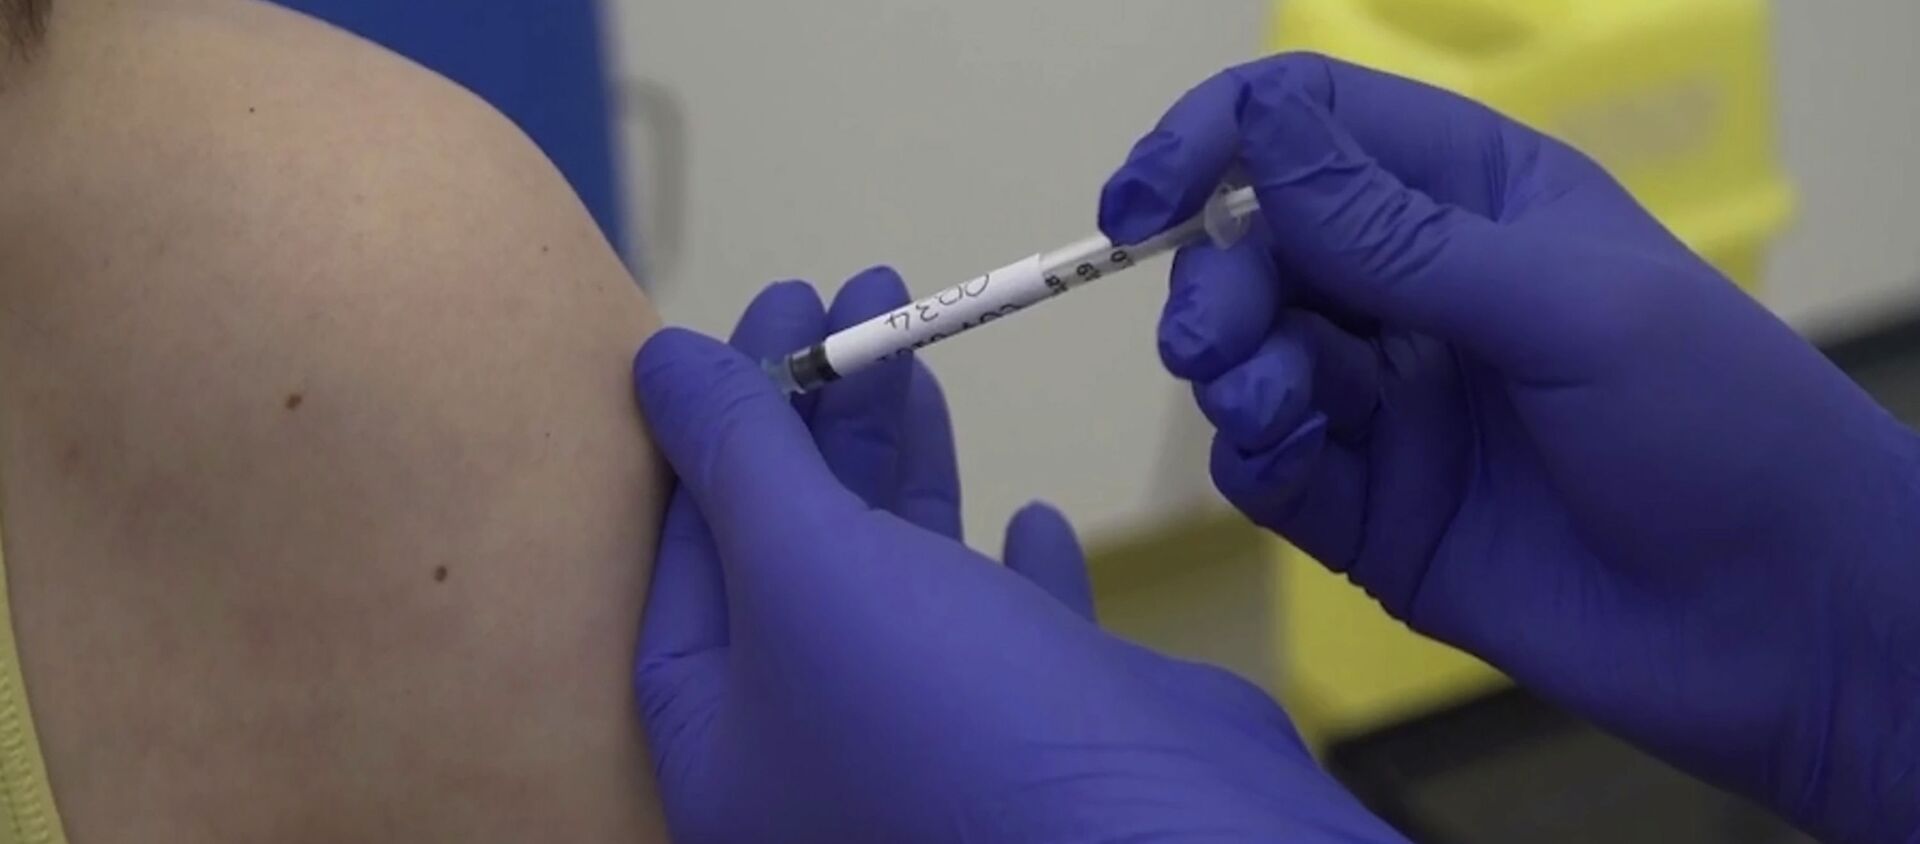 Screen grab taken from video issued by Britain's Oxford University, showing microbiologist Elisa Granato, being injected as part of the first human trials in the UK for a potential coronavirus vaccine, untaken by Oxford University, England, Thursday April 23, 2020 - Sputnik International, 1920, 01.03.2021